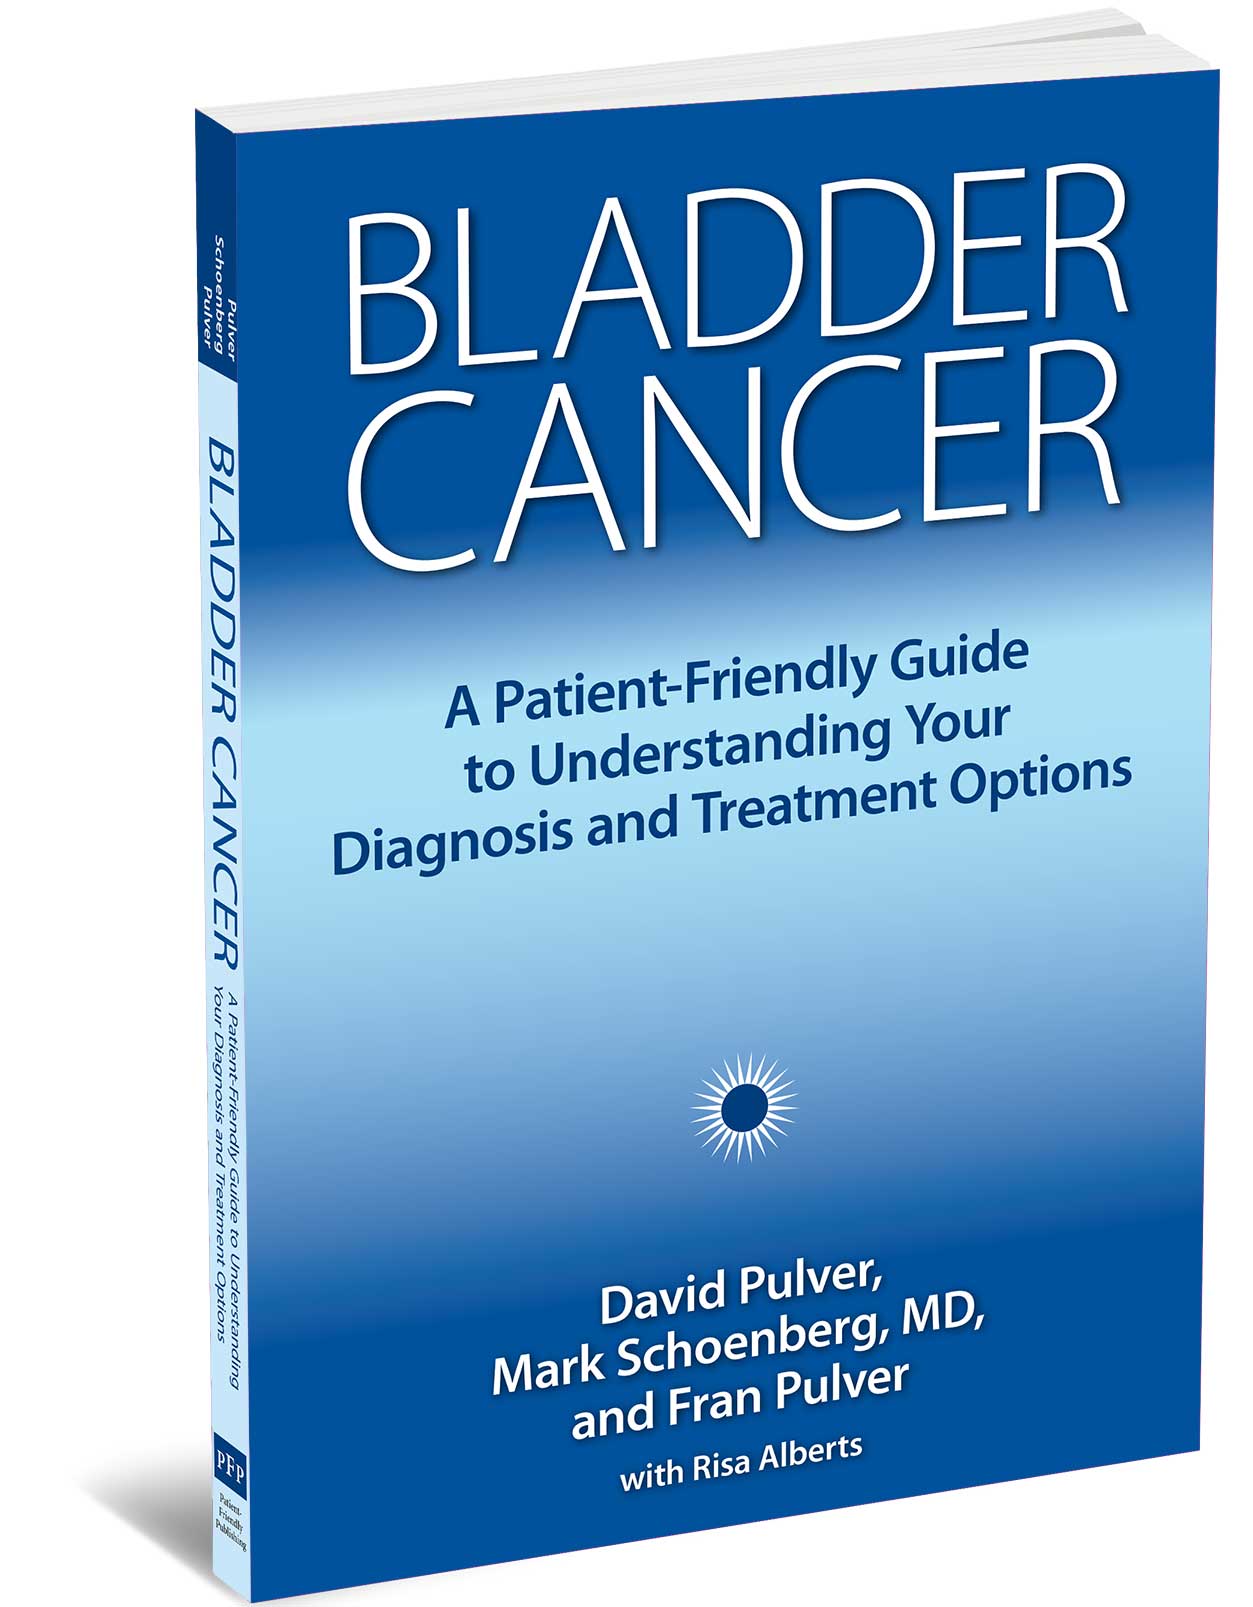 Thumbnail image of of Bladder Cancer: A Patient-Friendly Guide… which is about diagnosis and treatment of bladder cancer